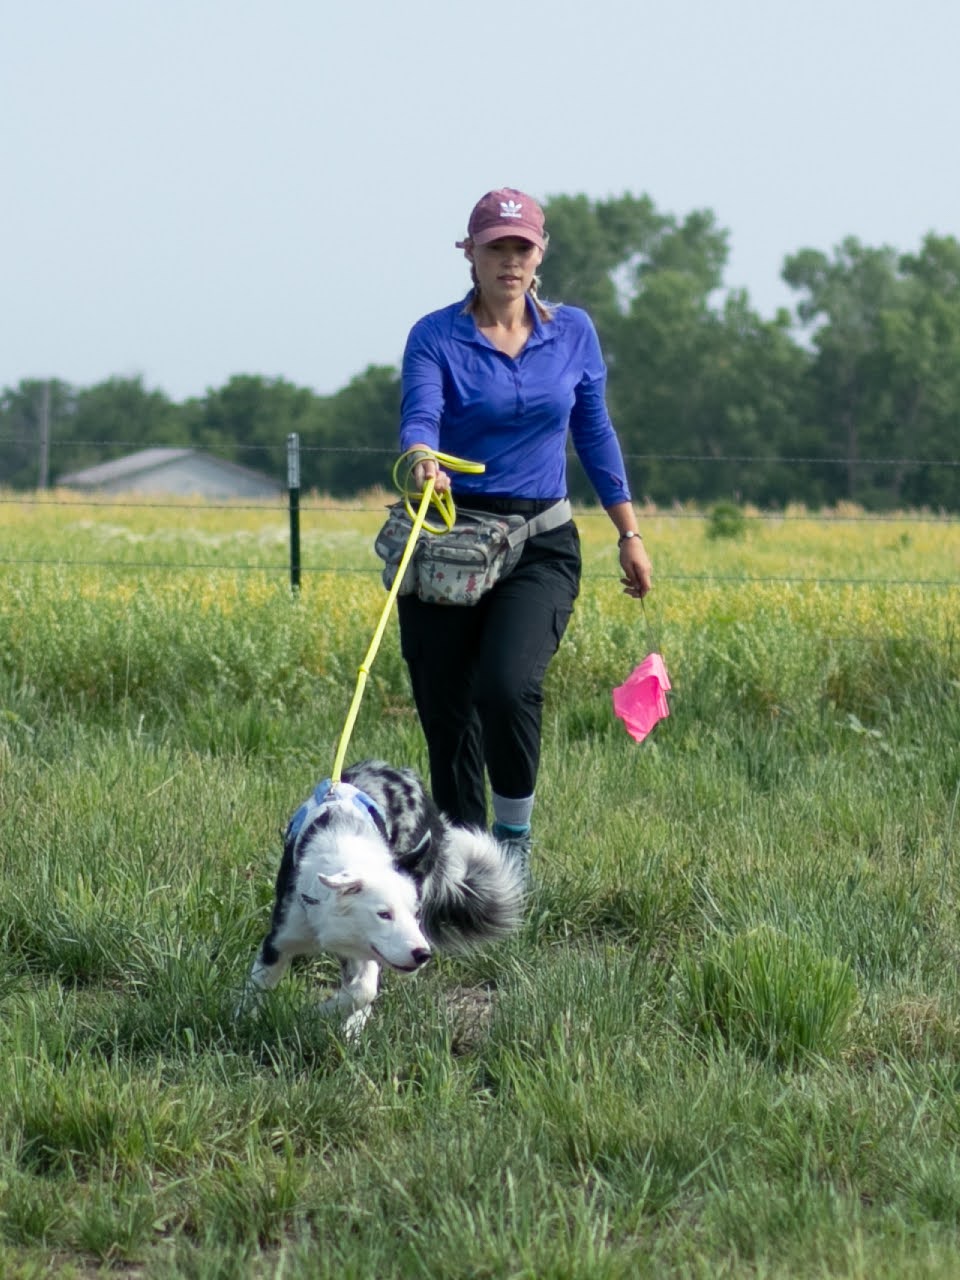 A dog handler with a blue shirt and pink pin flags walks alongside a blue merle border collie who is running with his head down. They are in a field and it is sunny.